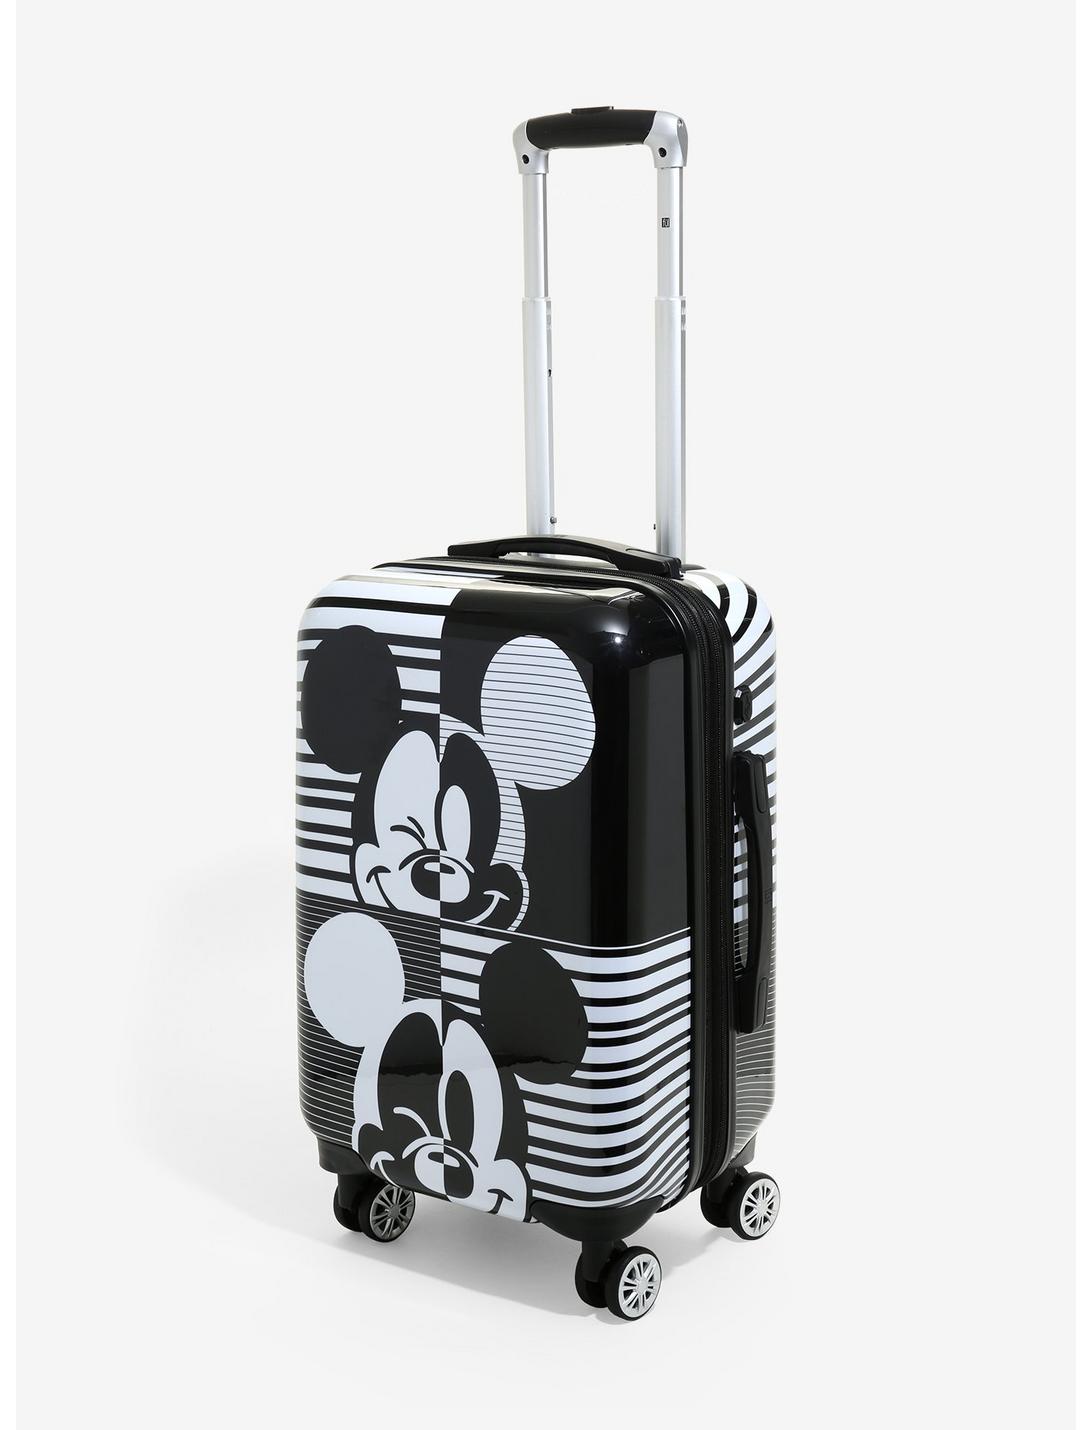 FUL Disney Mickey Mouse Black & White Hard-Sided 21 Inch Carry-On Rolling Luggage, , hi-res